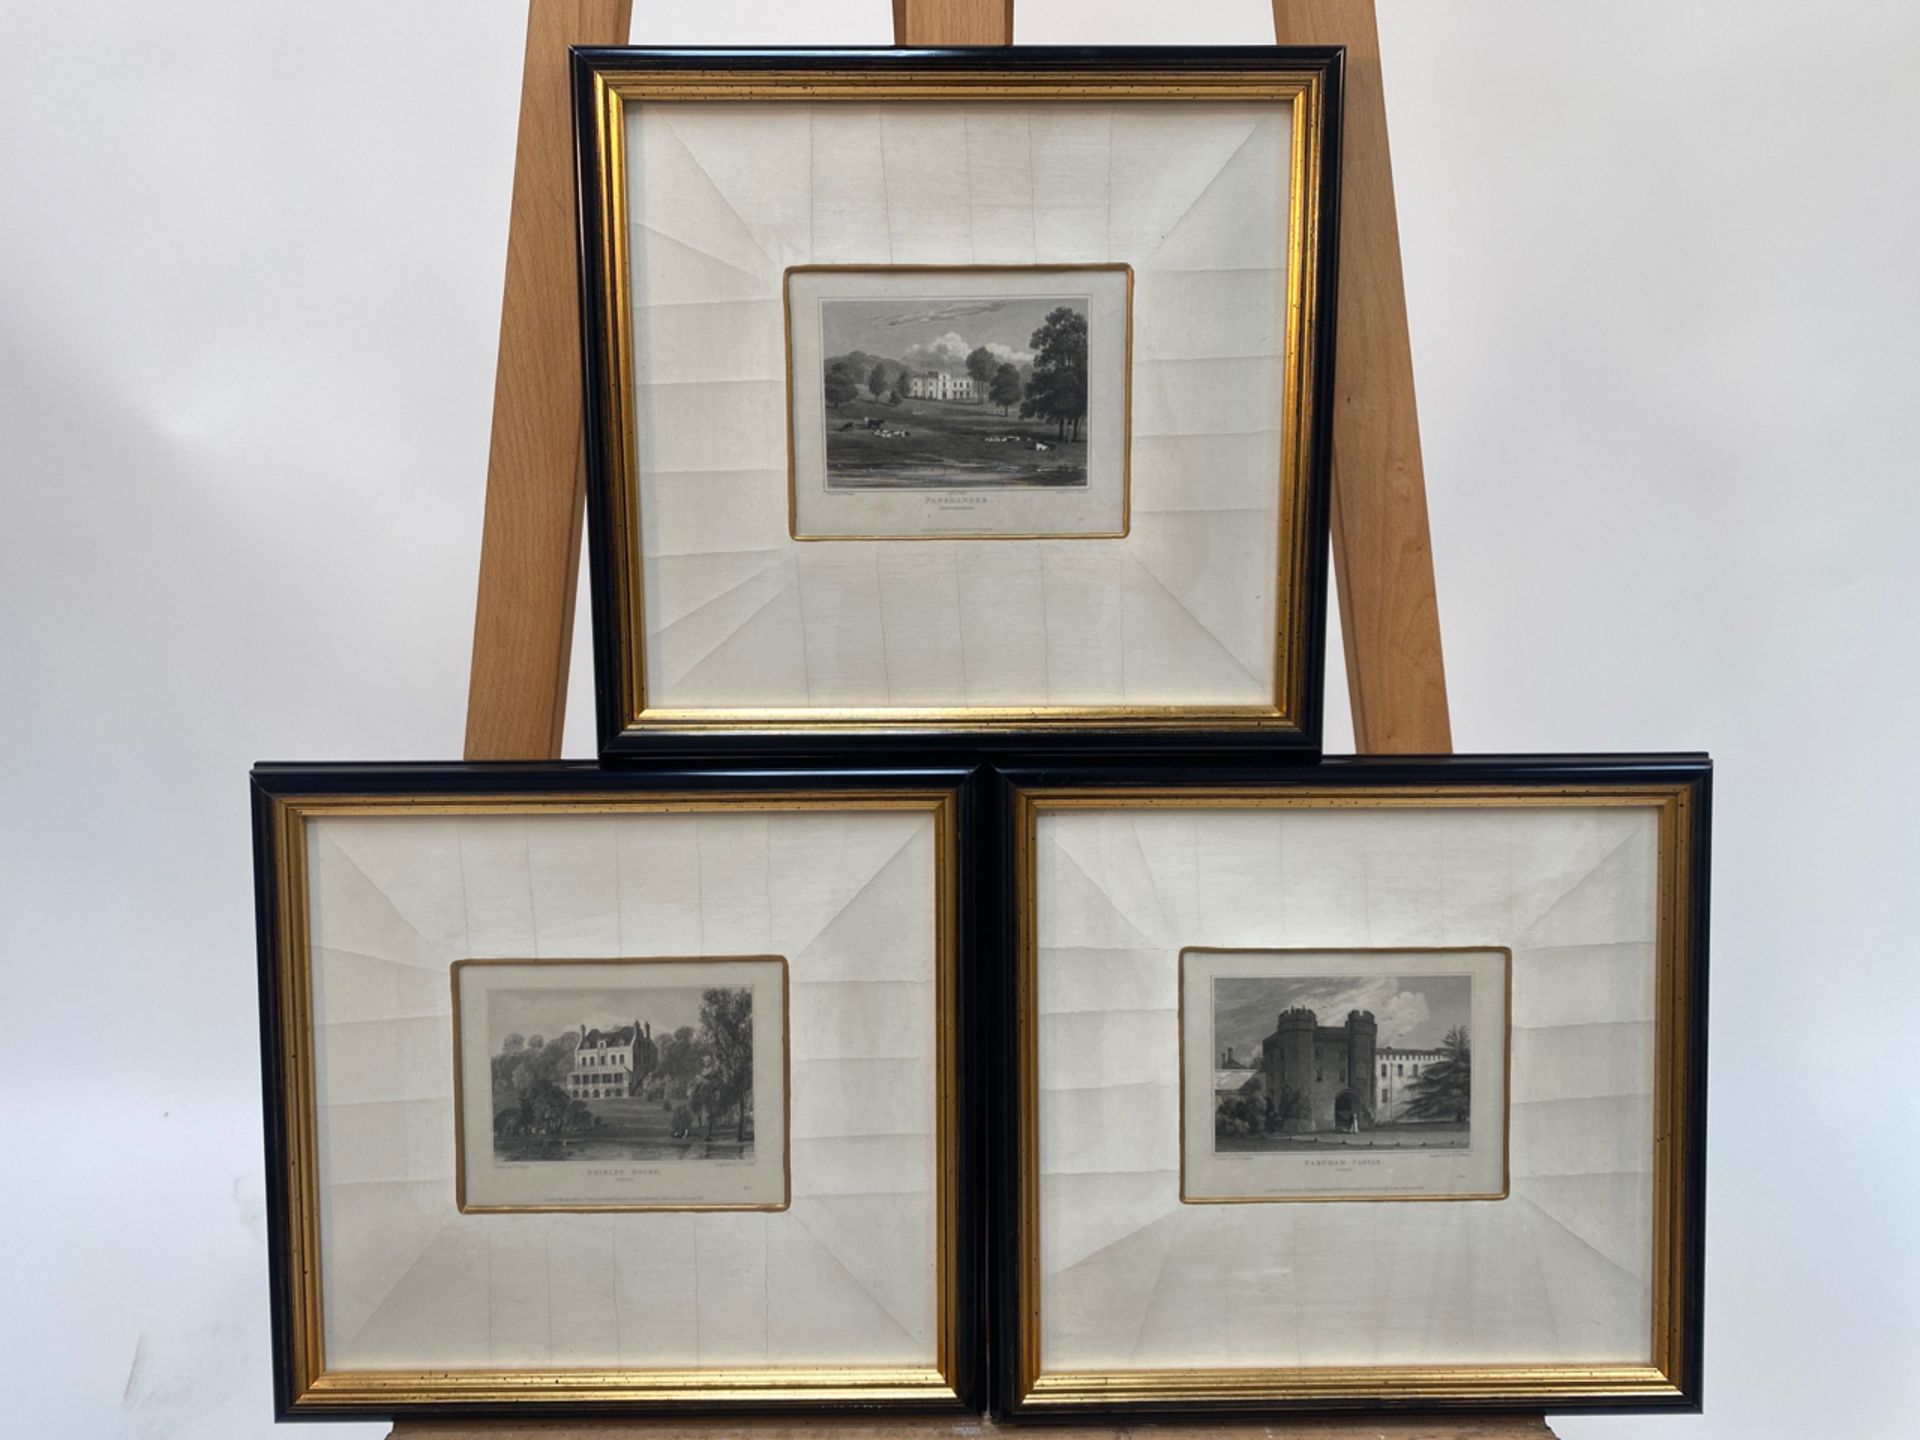 Series of English Estate Lithographs